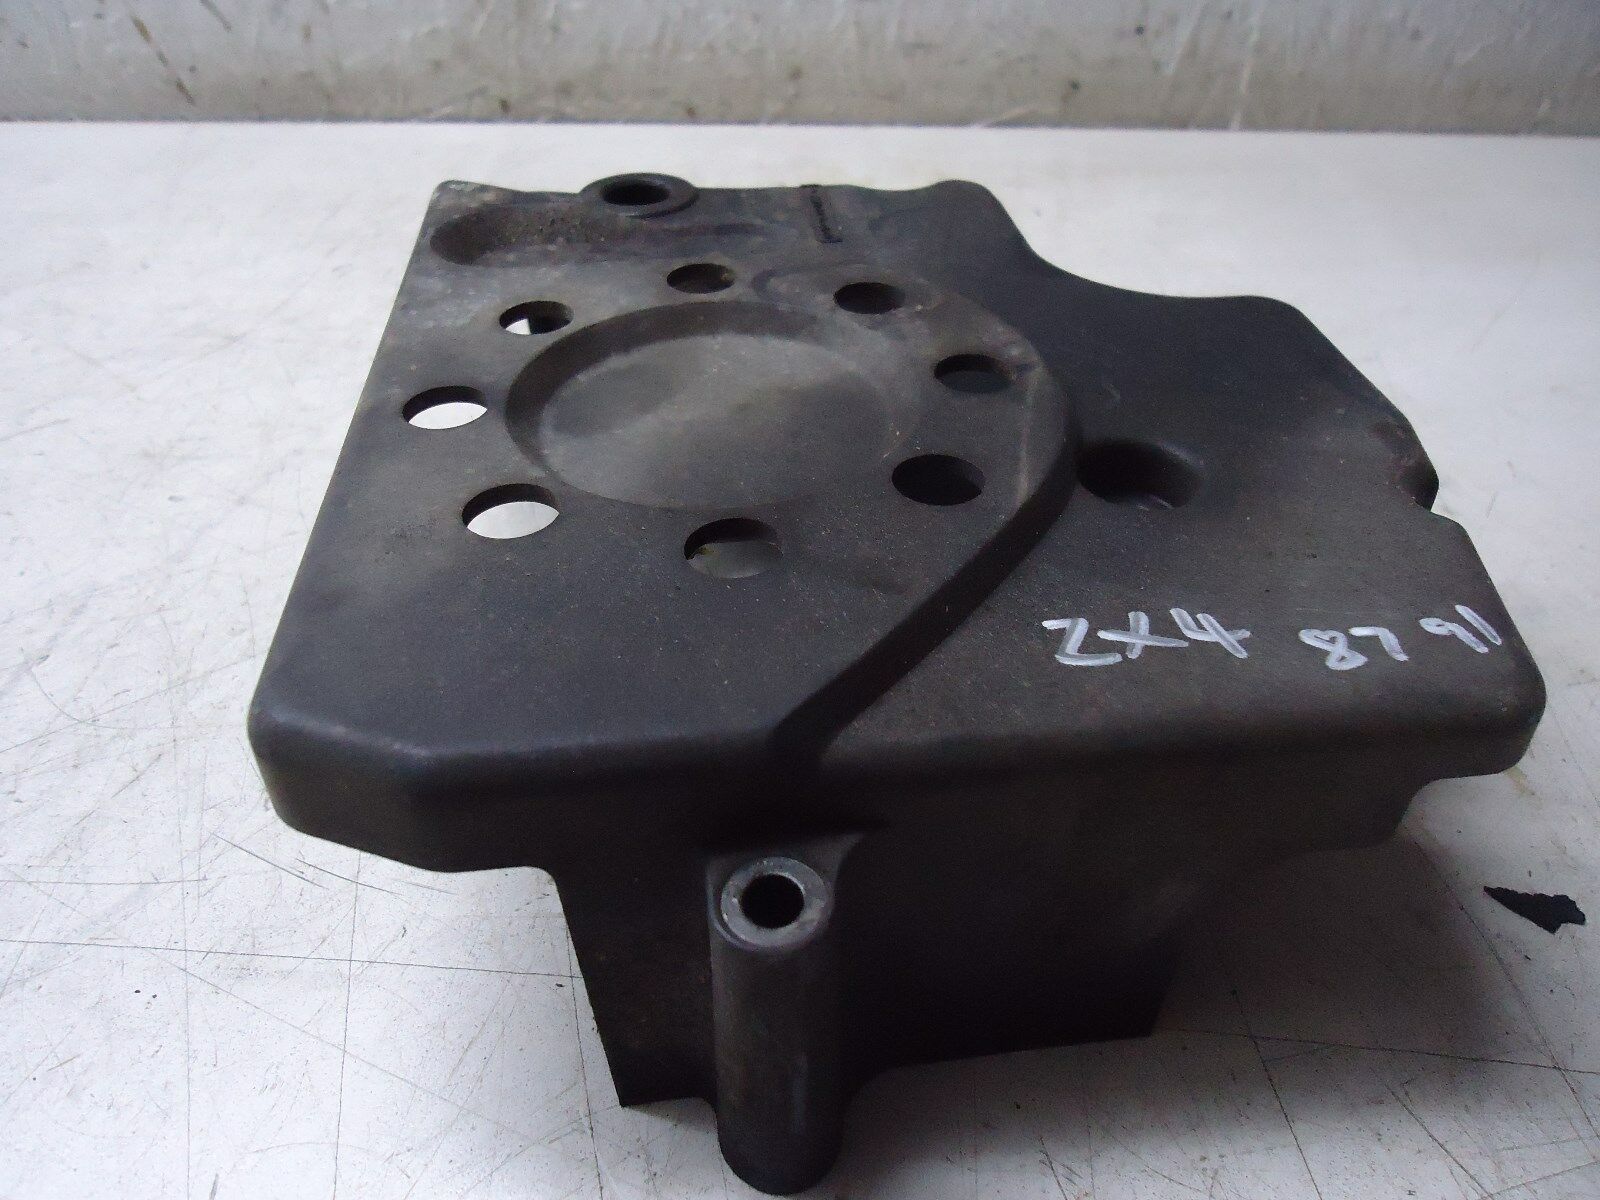 Kawasaki ZX4 Sprocket Cover 87-91 ZX400 Engine Casing Cover